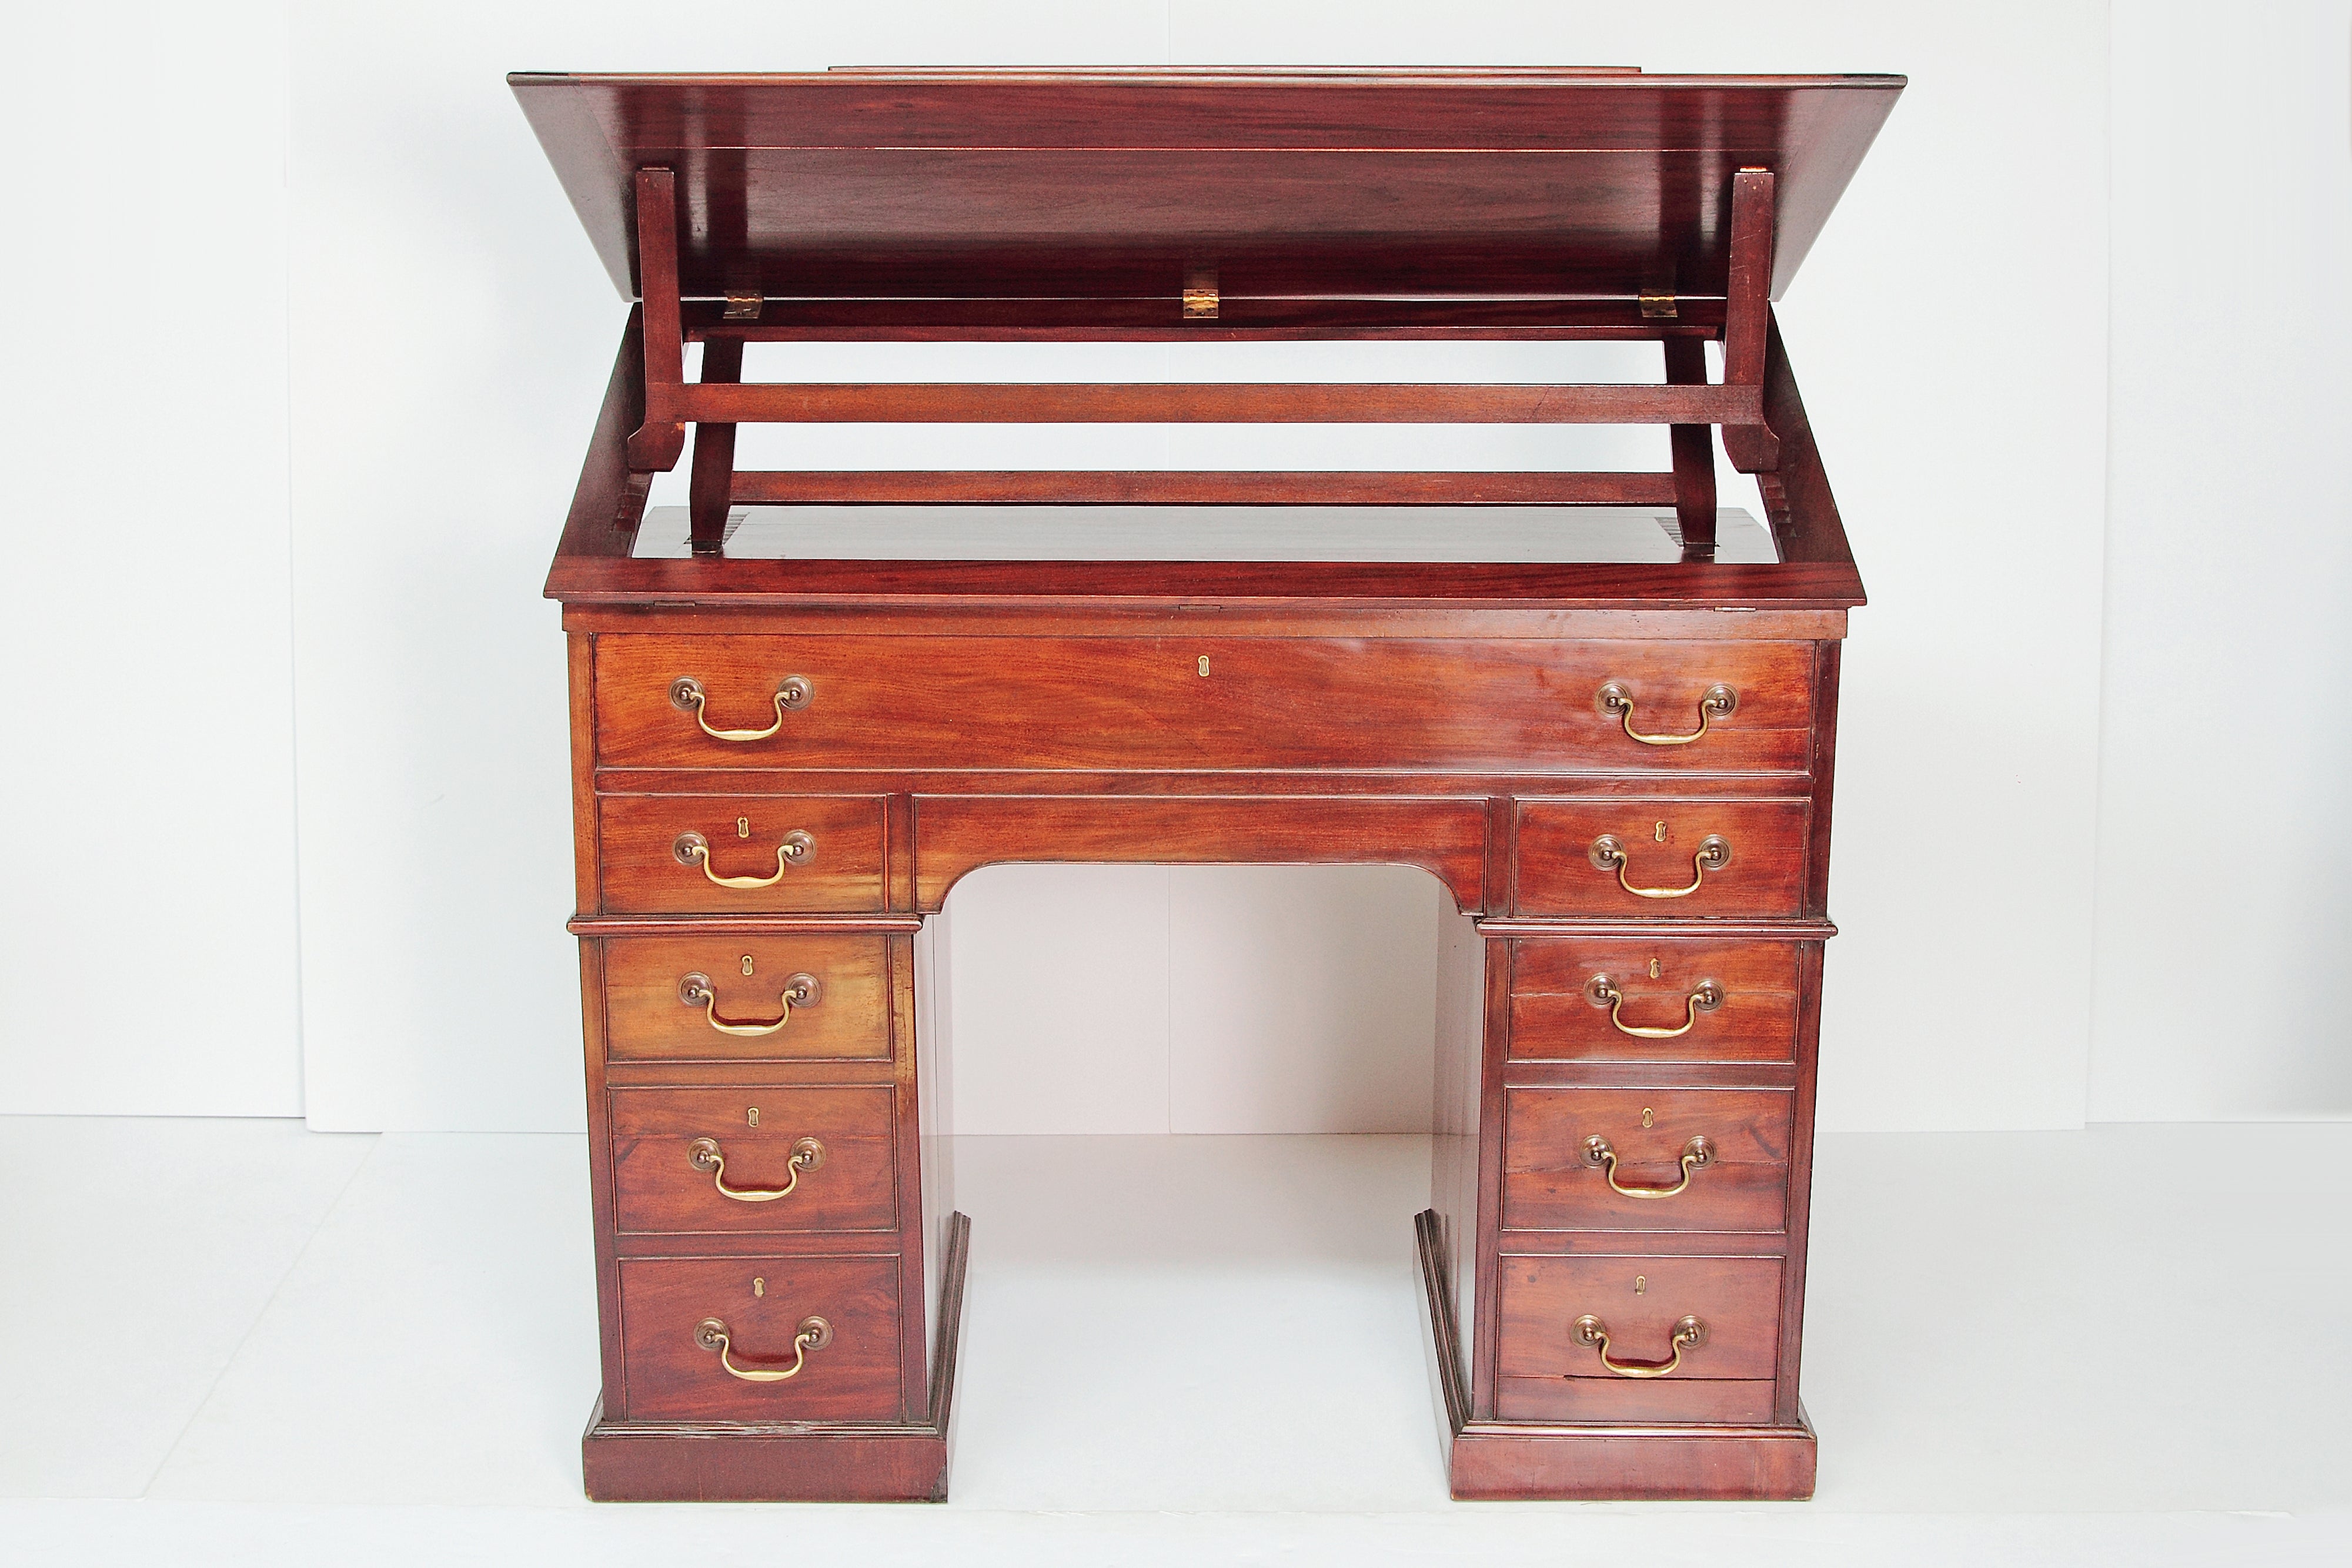 George III Mahogany Gentleman's Writing or Library Table probably Gillows